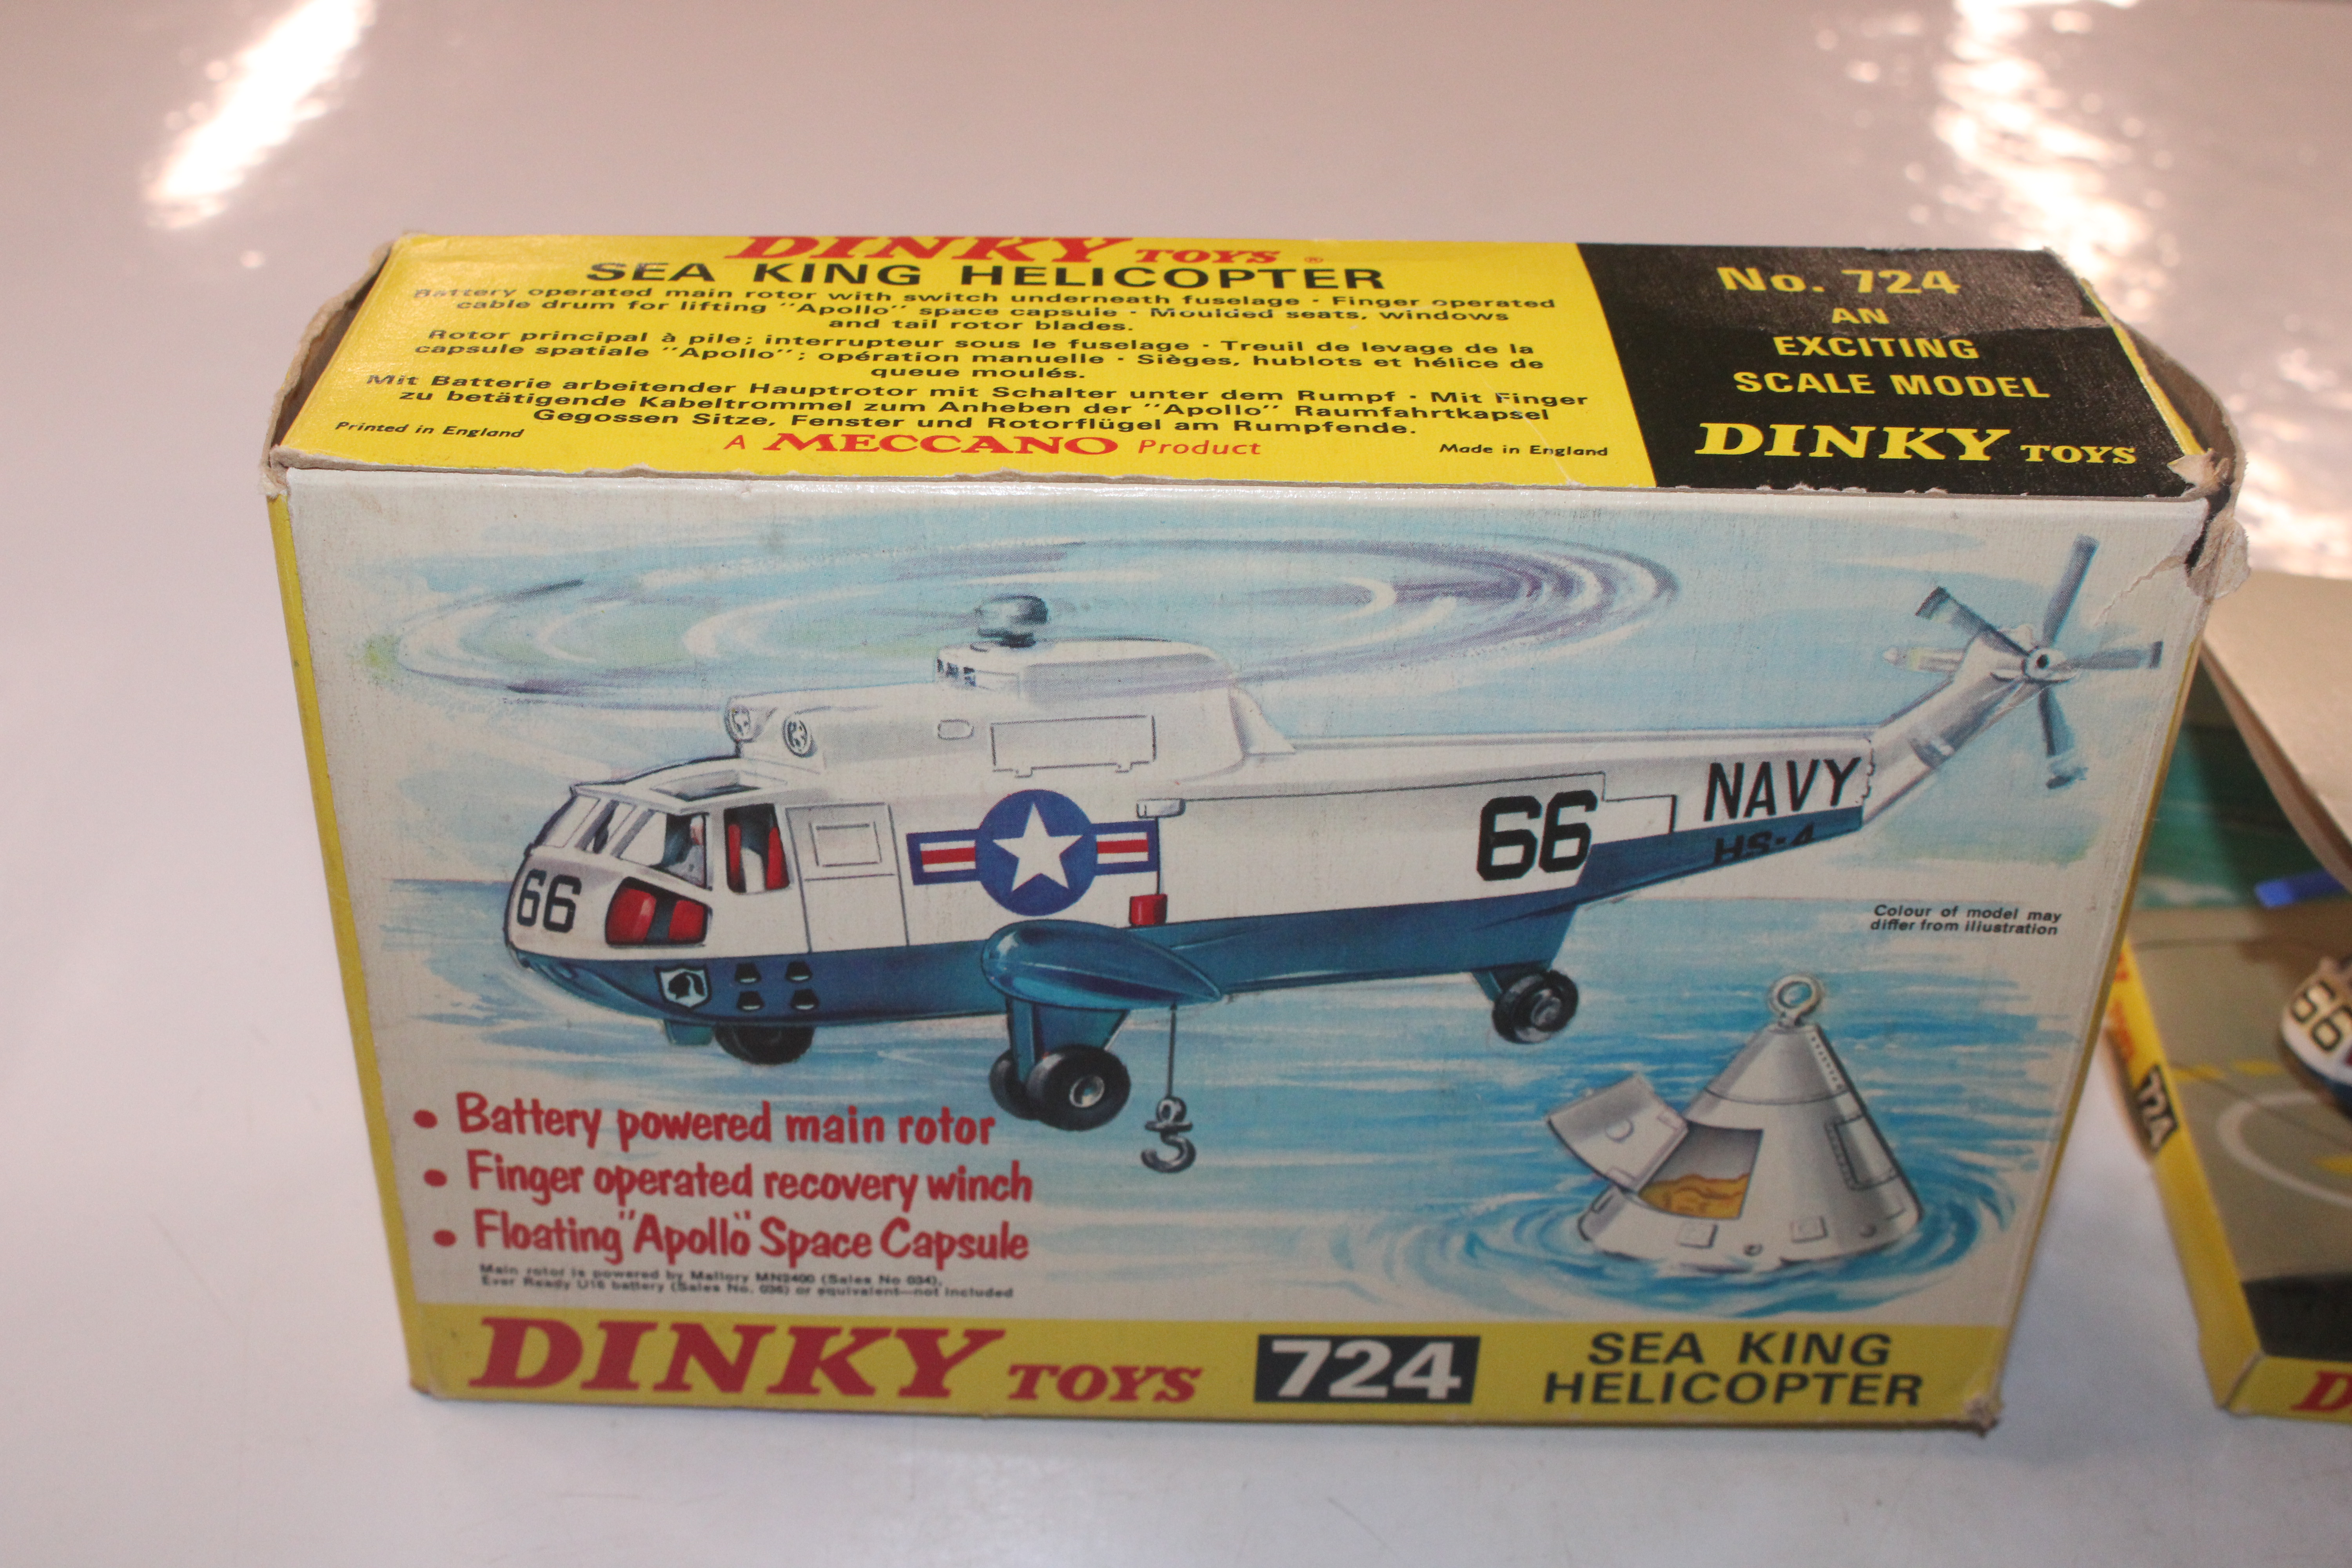 A Dinky toy 724 Sea King helicopter and box - Image 4 of 4